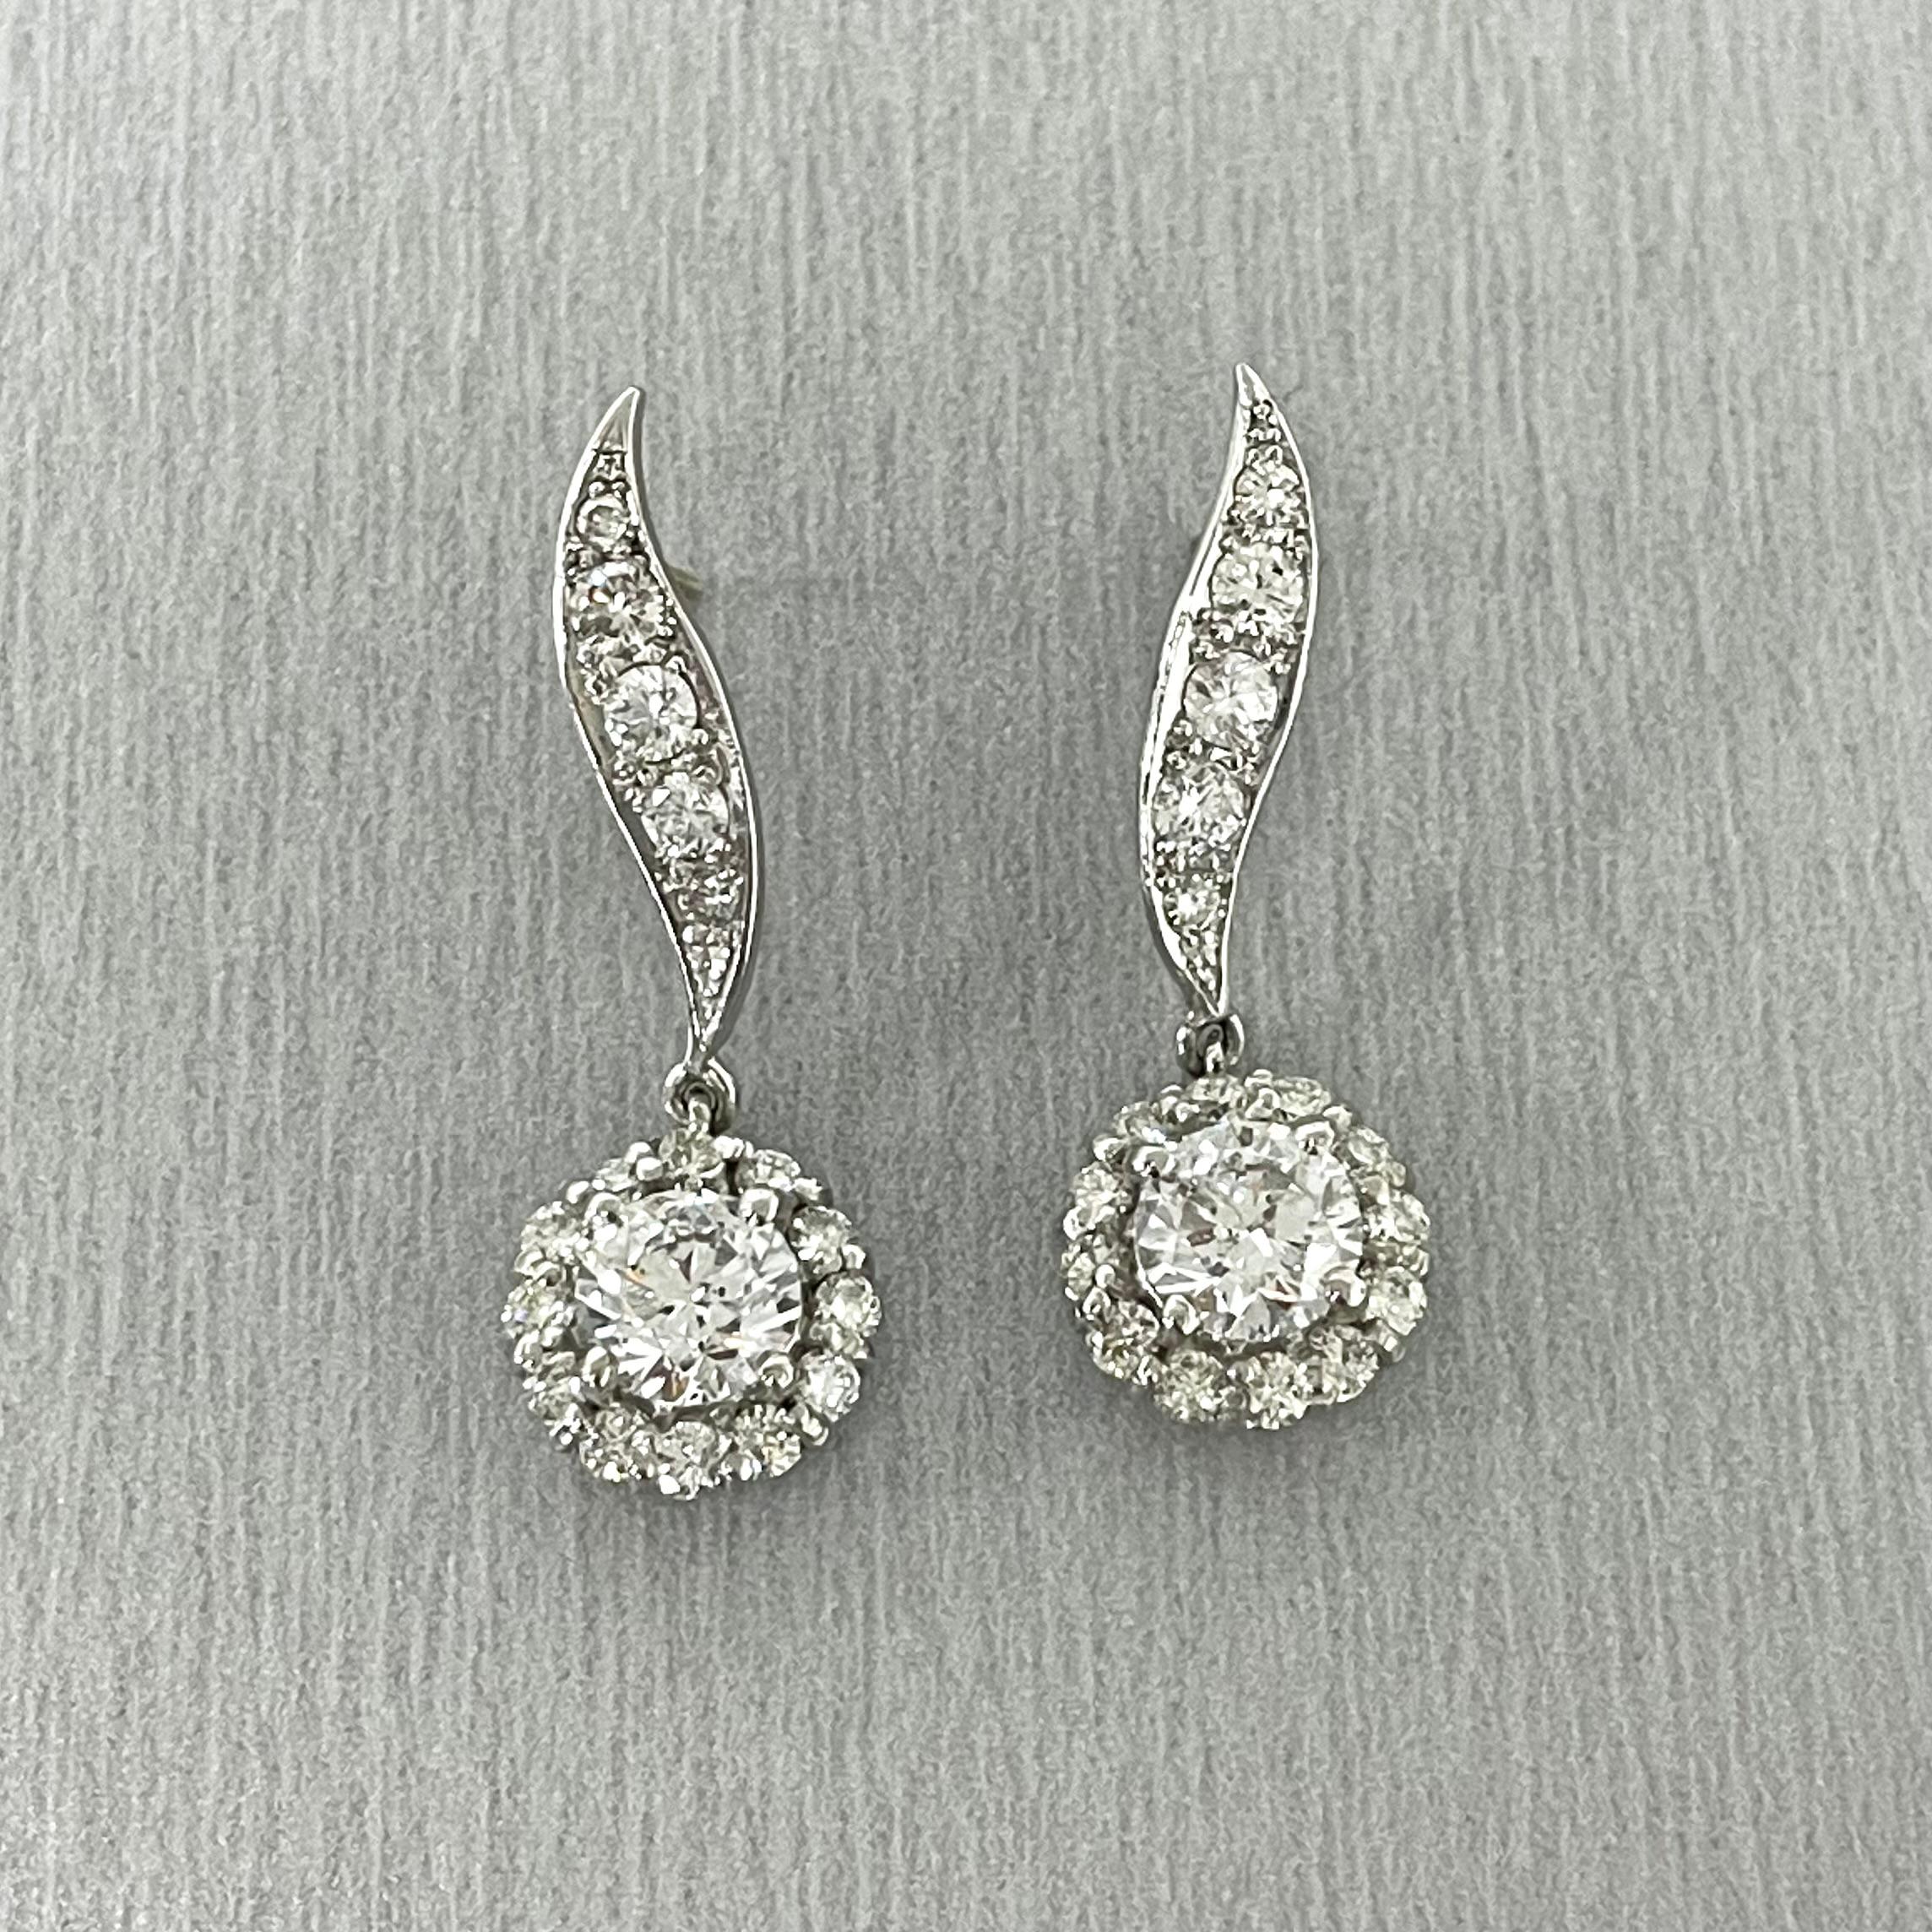 Round Cut Beauvince Leela Leaf Drop Earrings, '3.50 Ct Diamonds', in White Gold For Sale